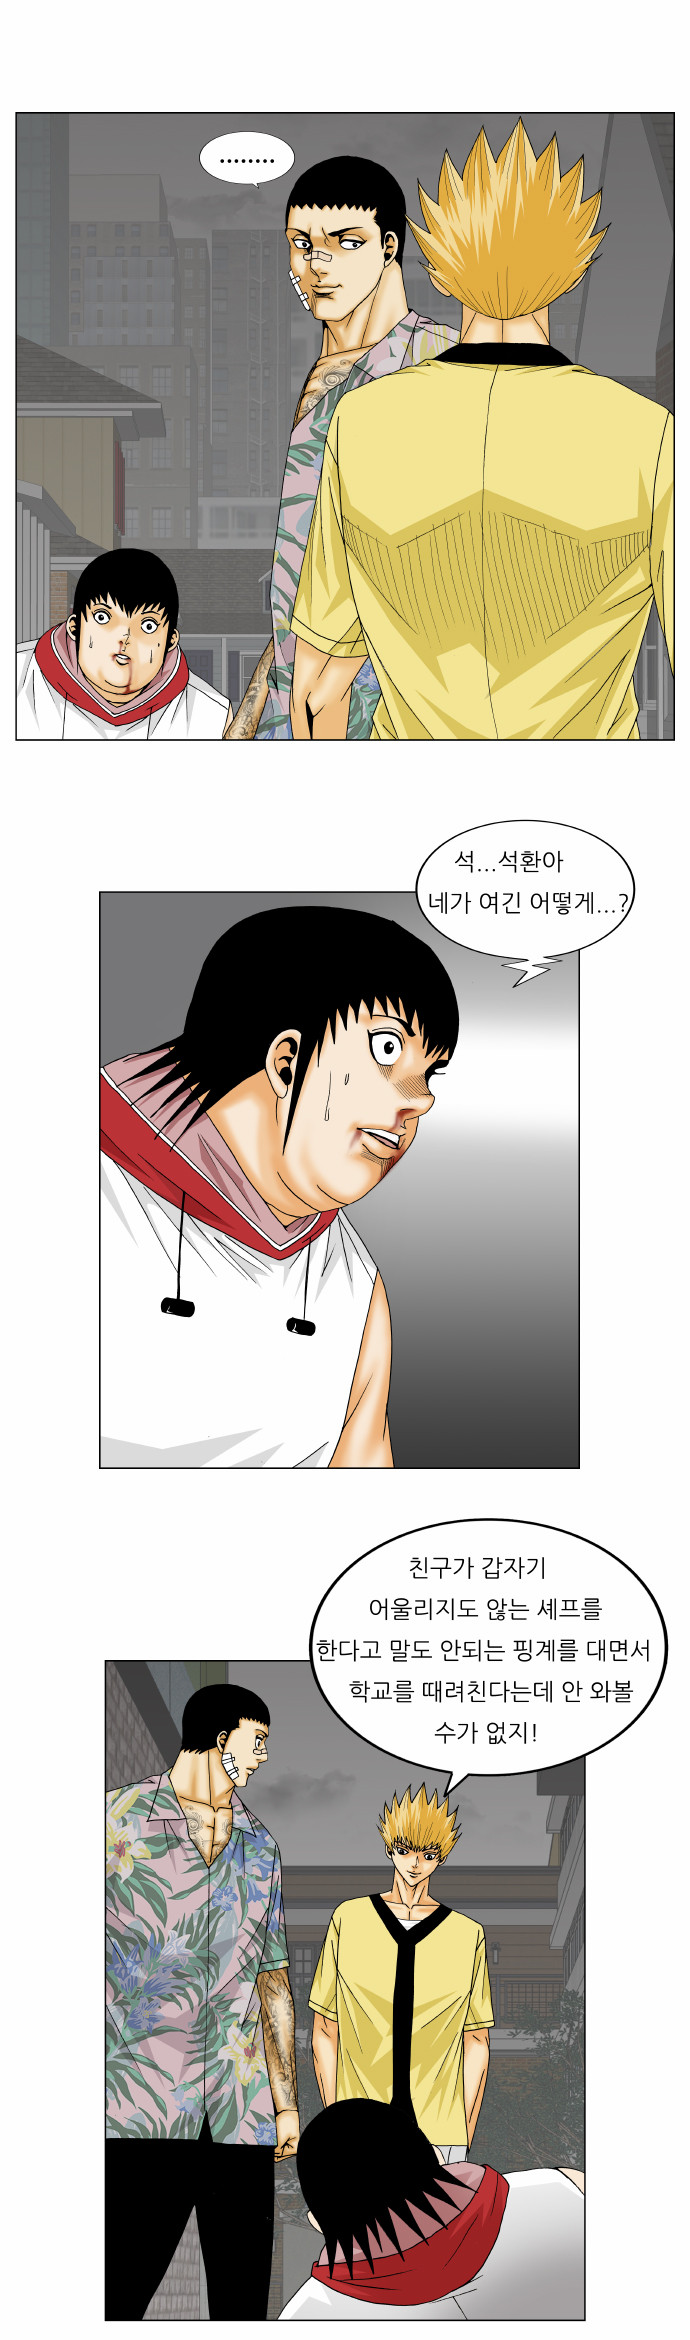 Ultimate Legend - Kang Hae Hyo - Chapter 158 - Page 3